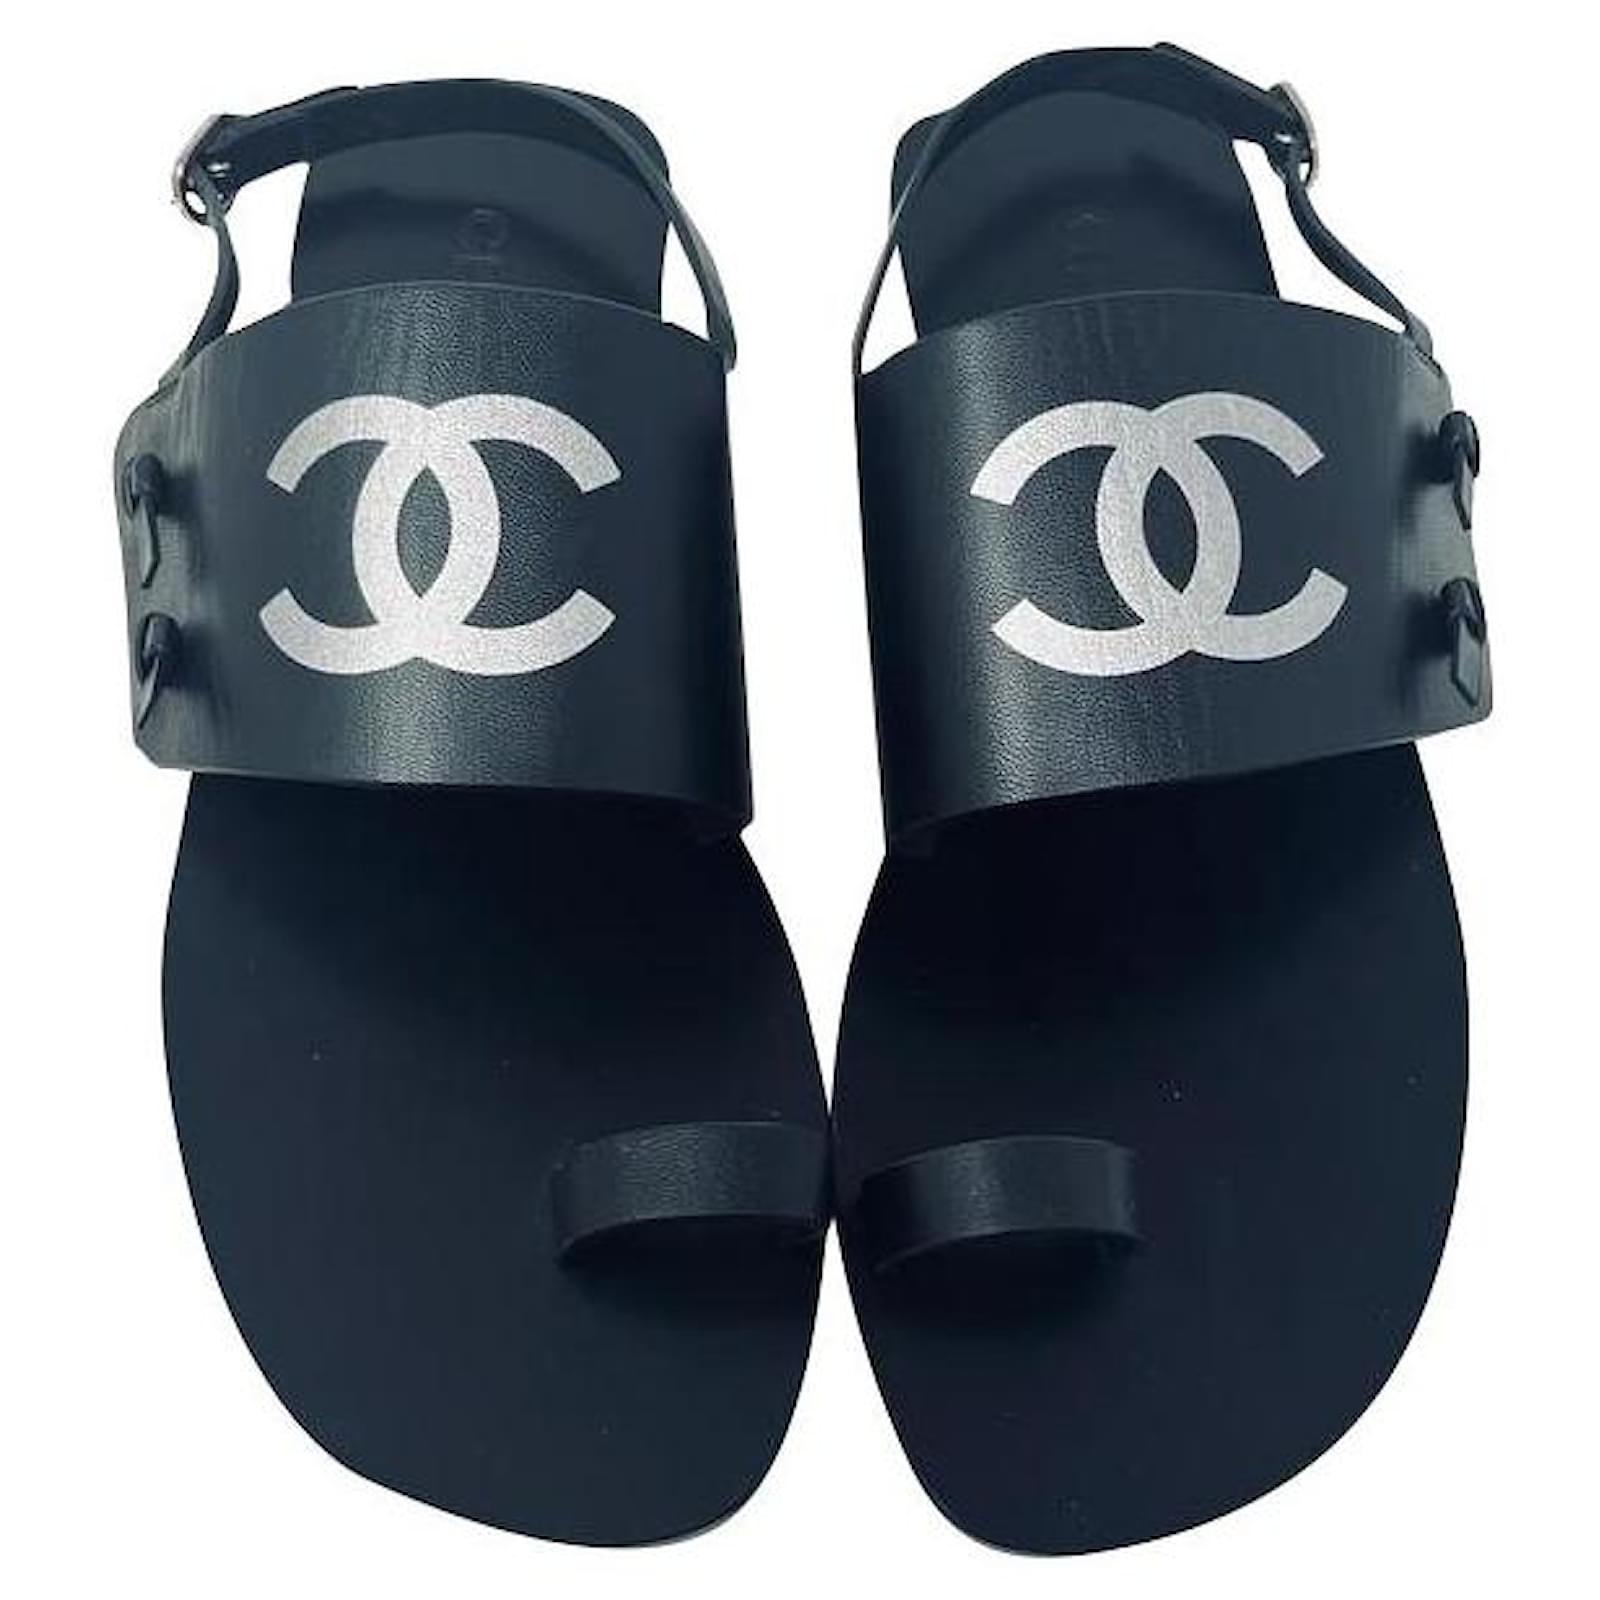 chanel red clogs 38